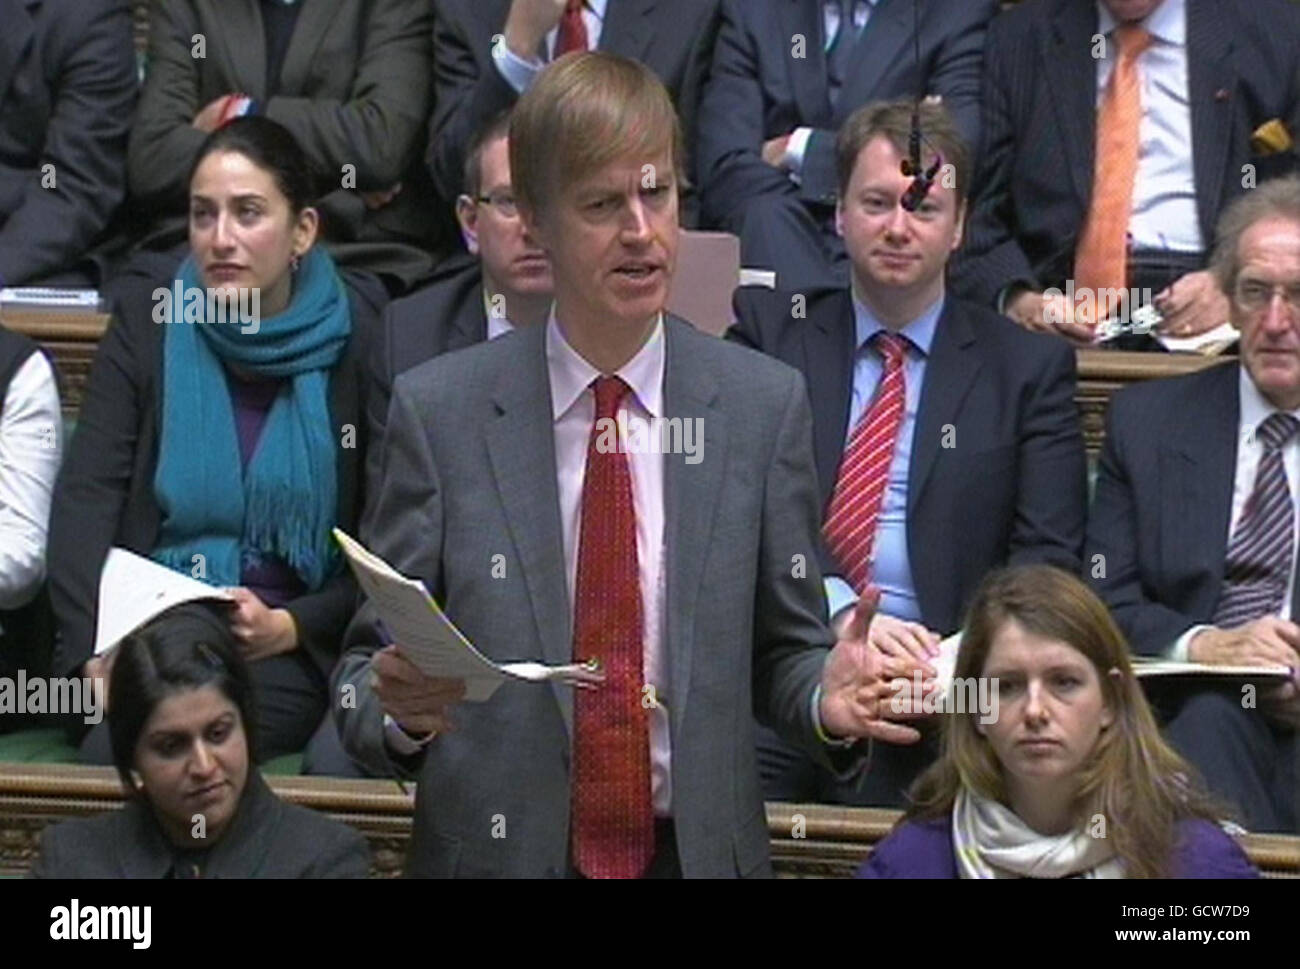 Labour MP for East Ham, Stephen Timms asks a question during Prime Minister's Questions in the House of Commons, London. Stock Photo